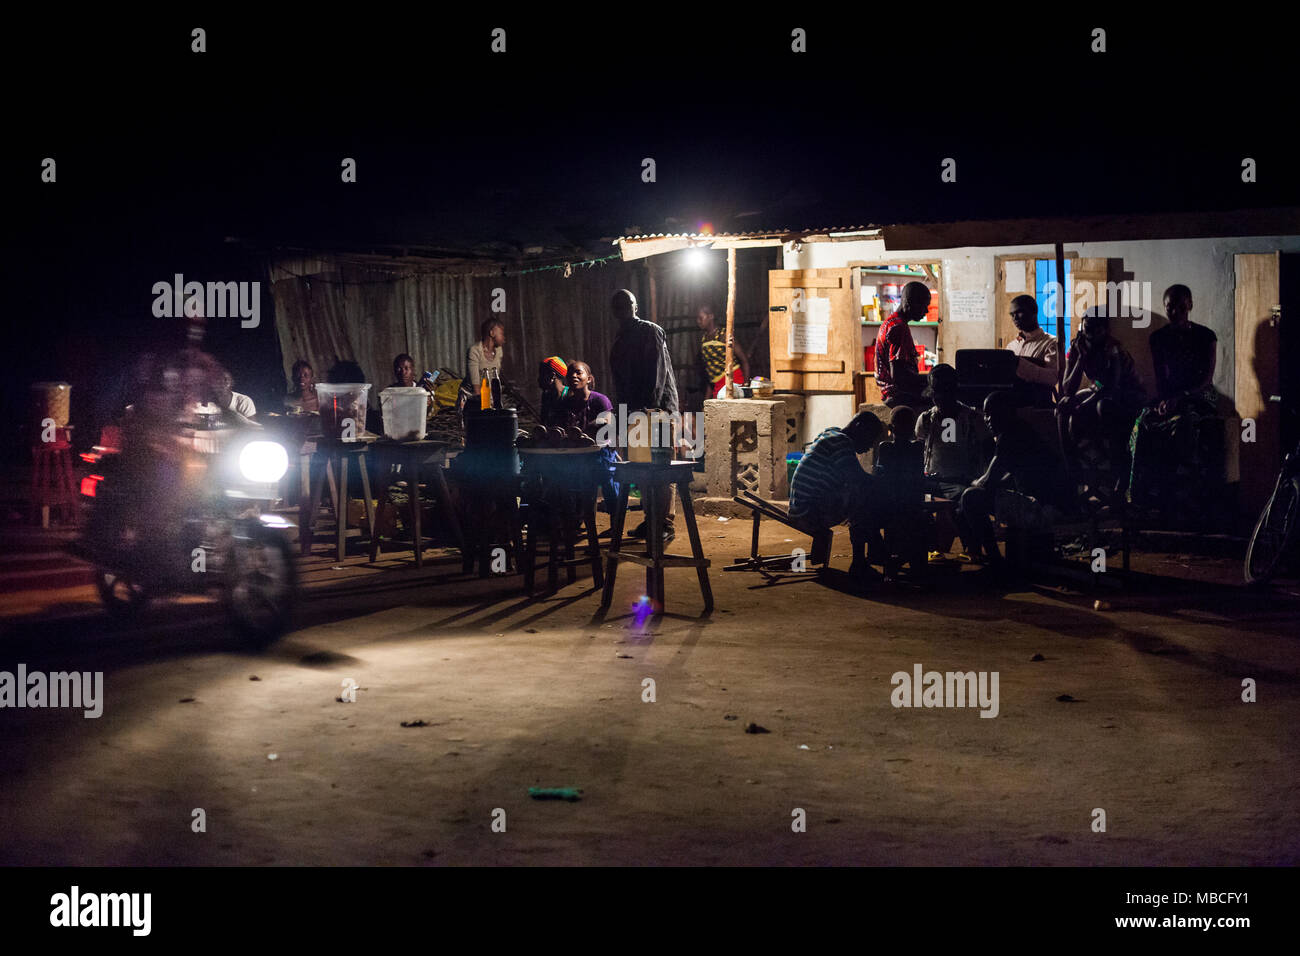 YONGORO, SIERRA LEONE - June 04, 2013: West Africa, group of unknown people in a bar at night in Yongoro Stock Photo